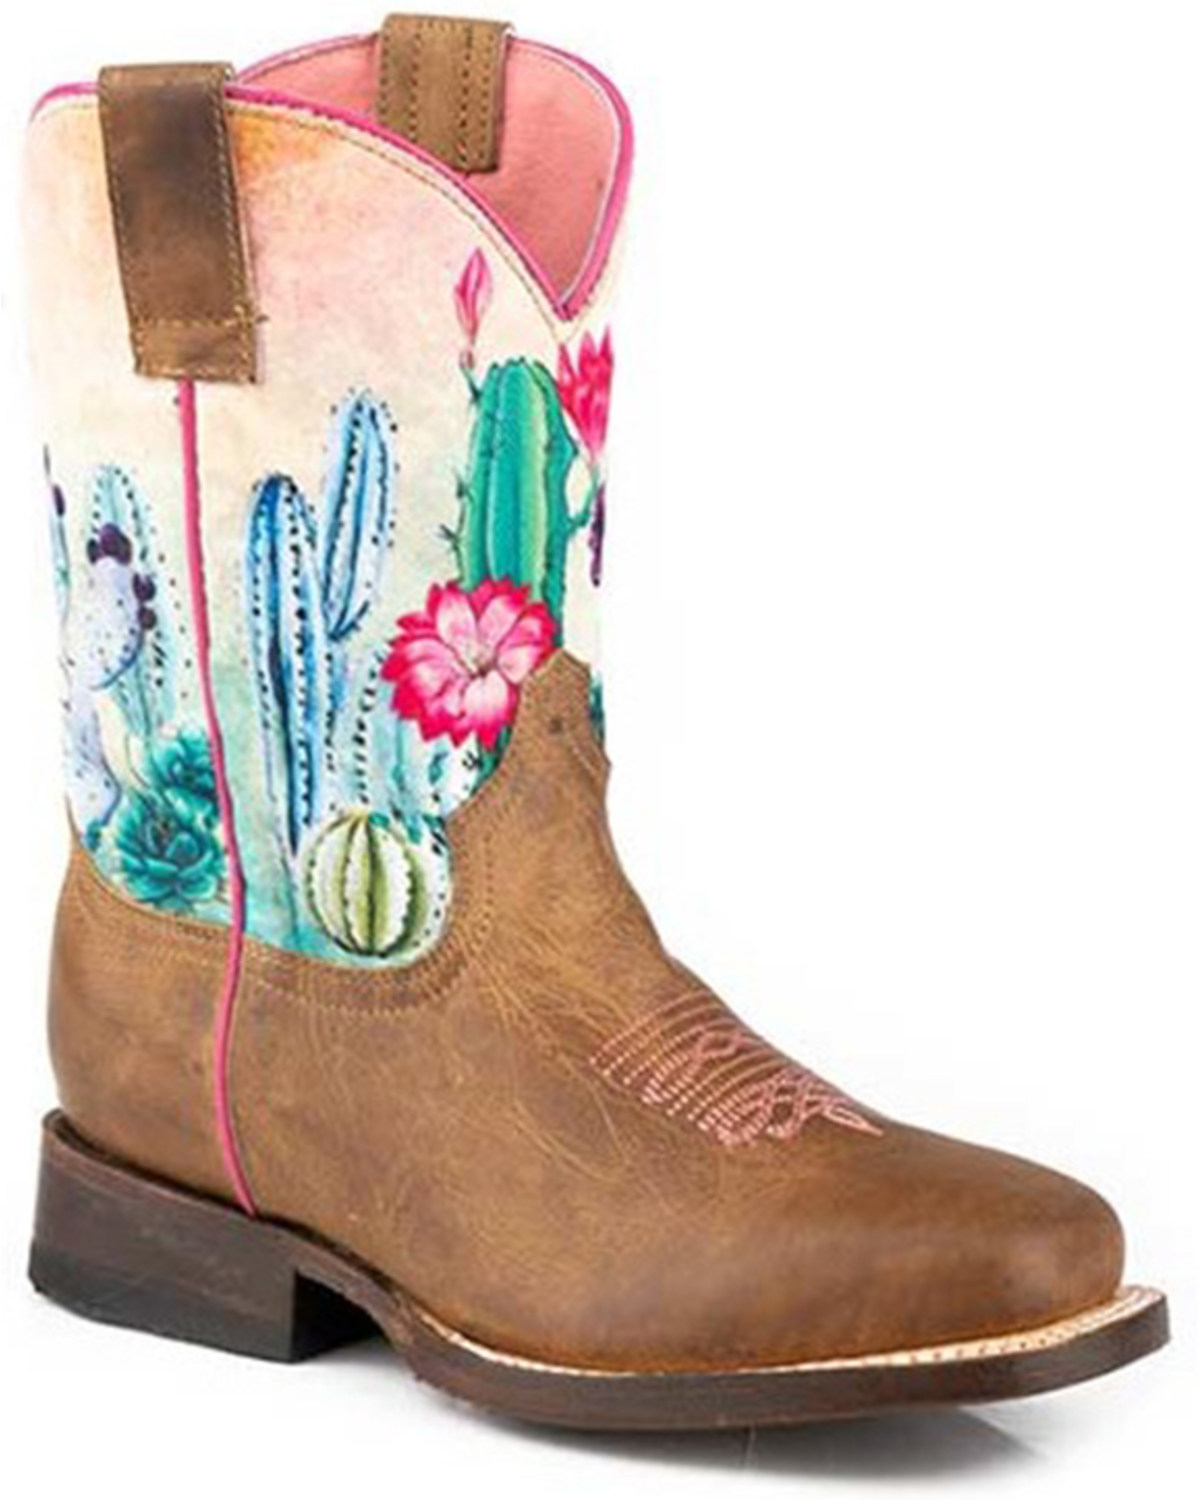 Roper Little Girls' Cacti Western Boots - Square Toe